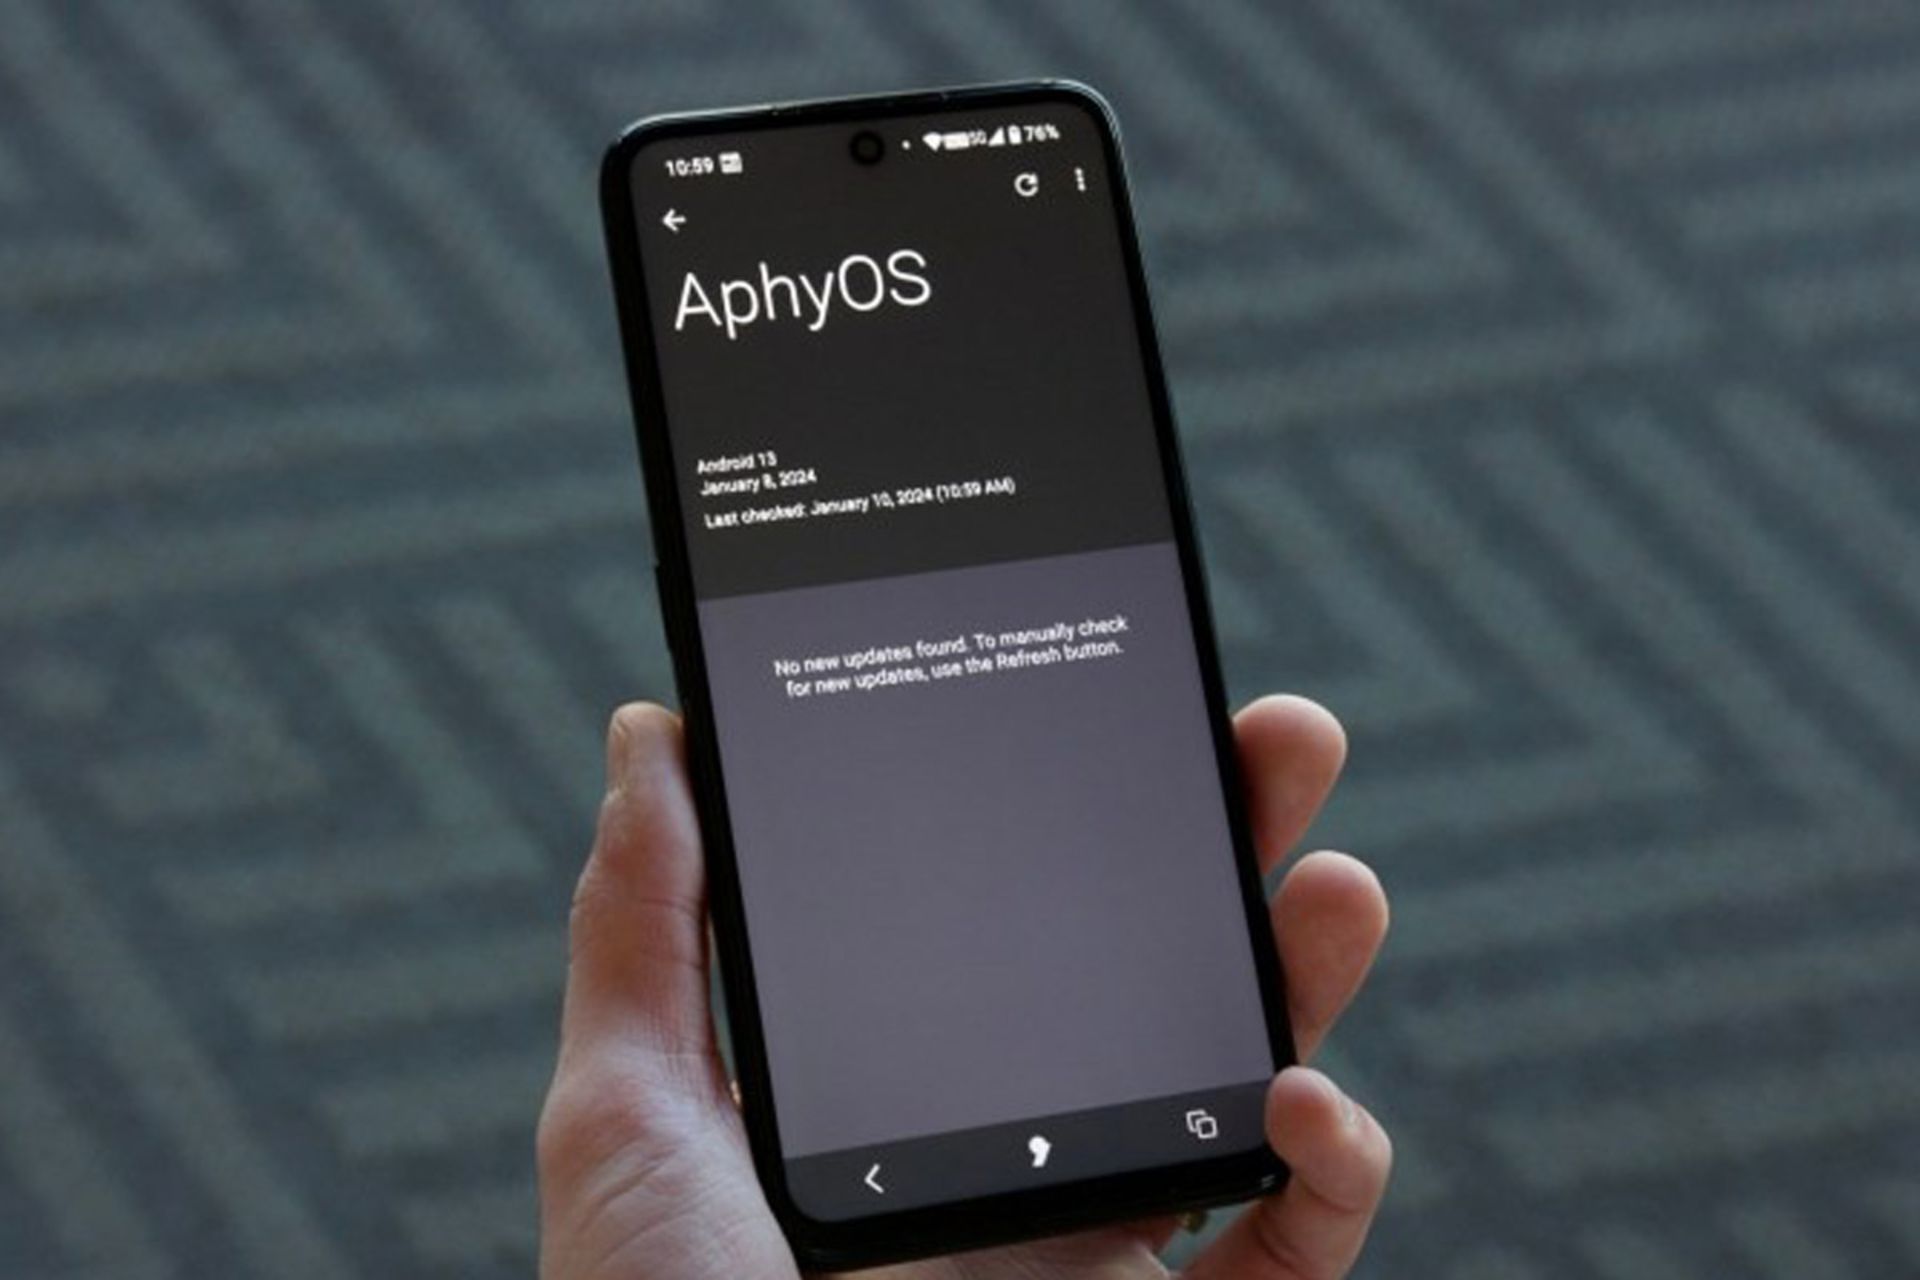 Apostrophy operating system in a smartphone